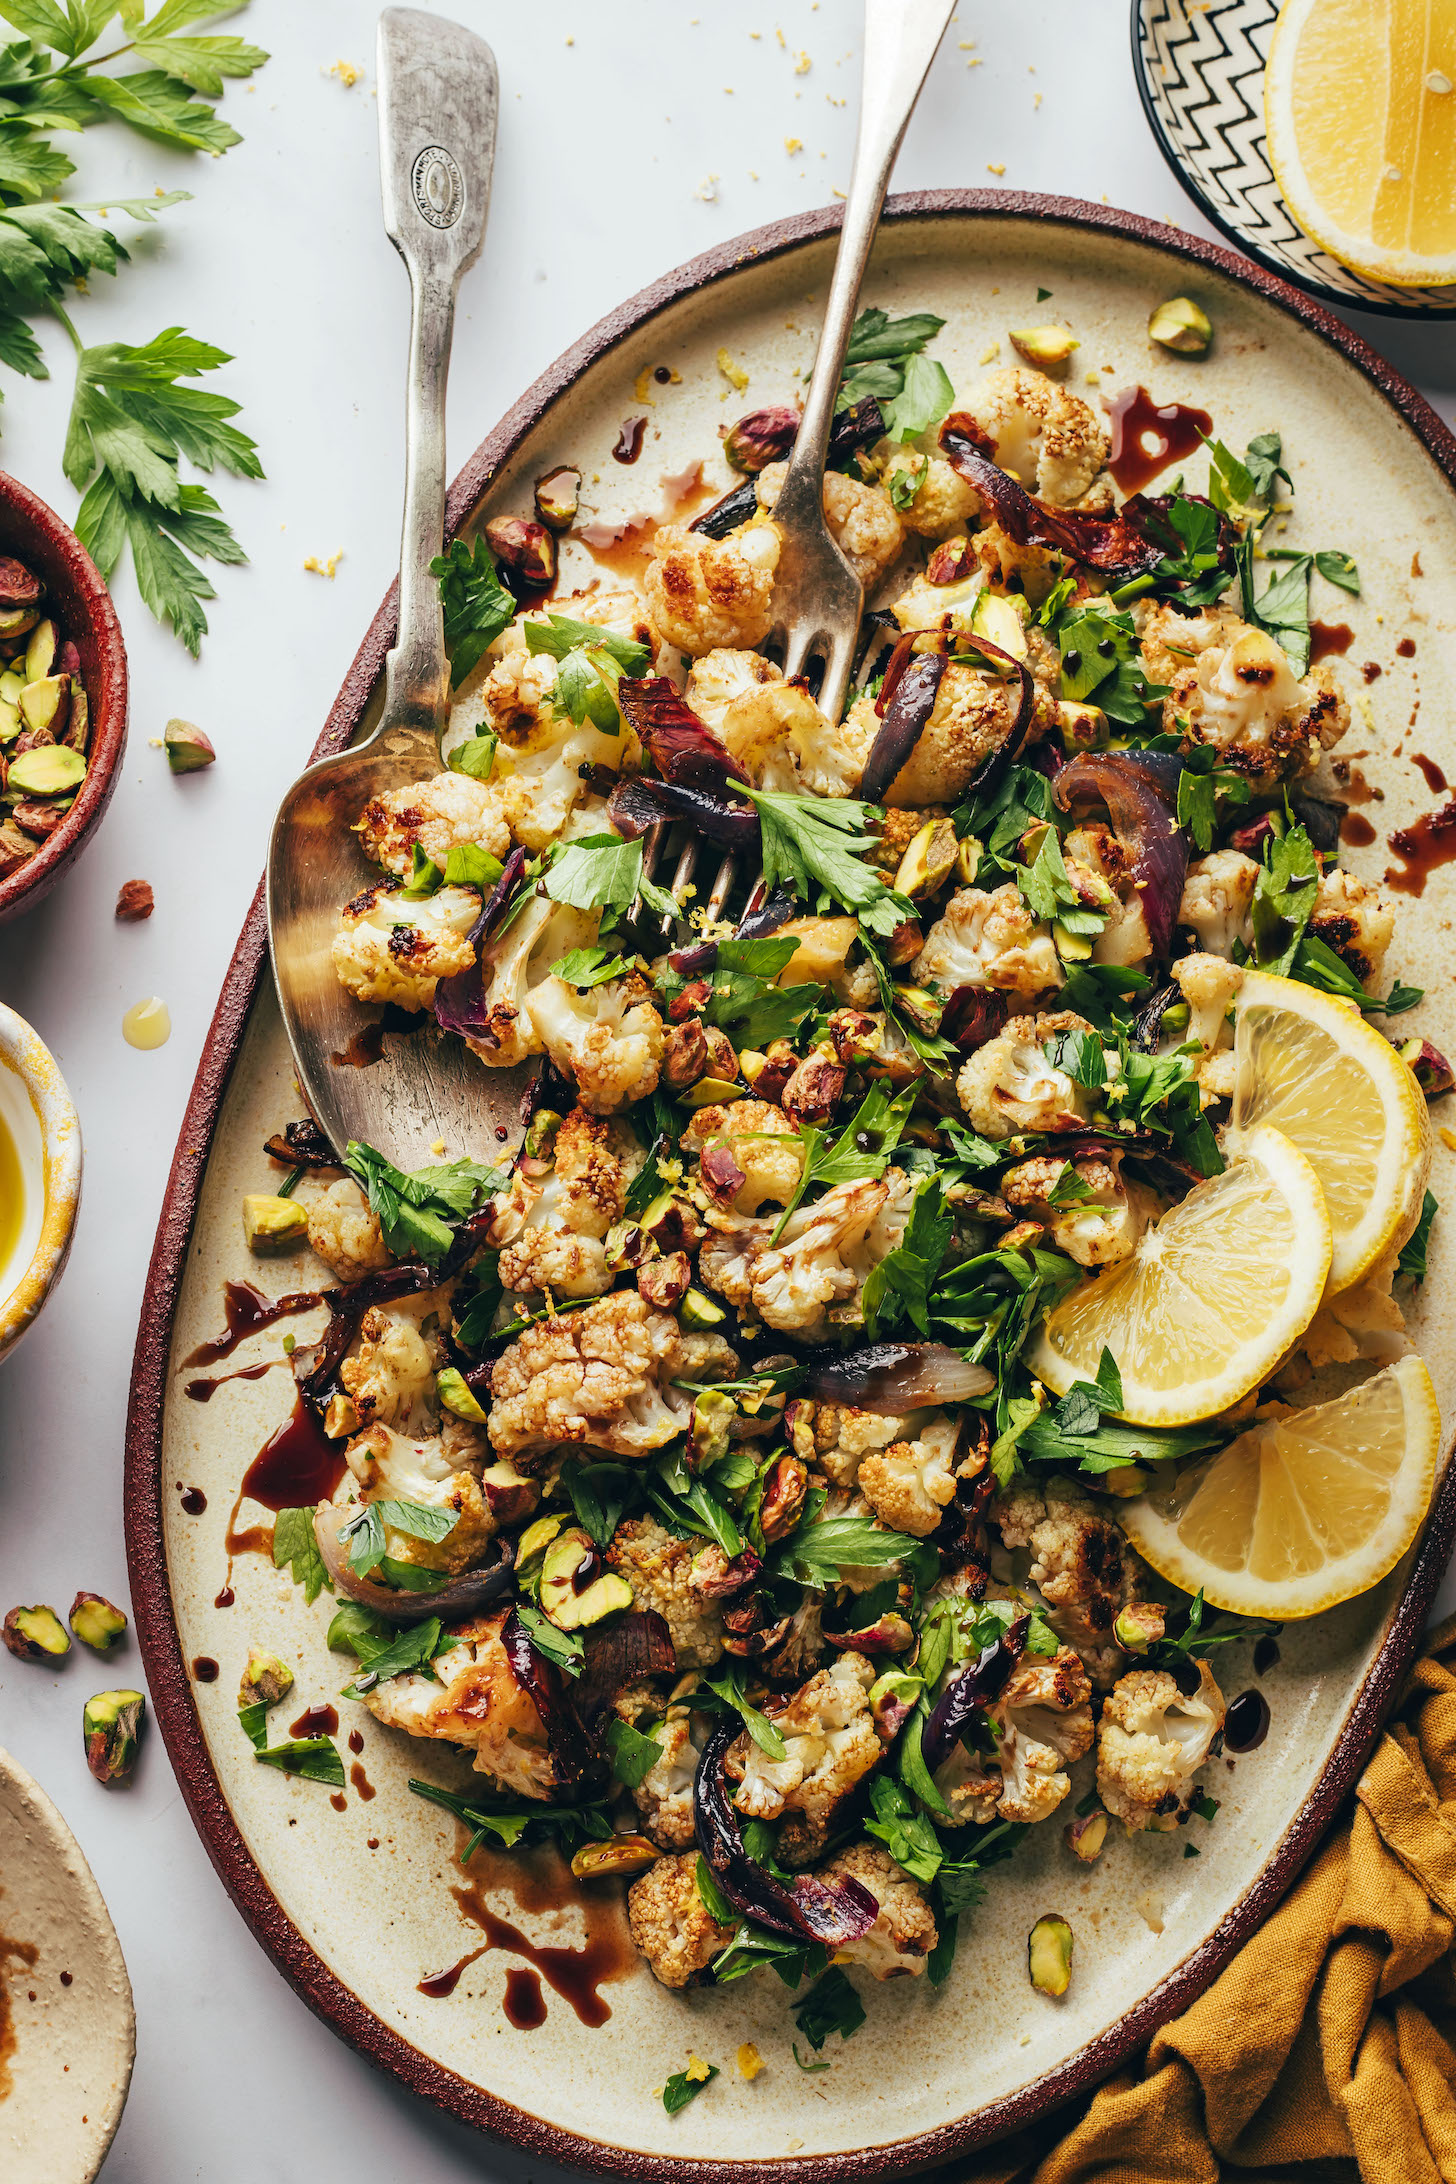 Platter of roasted cauliflower salad with pistachios, parsley, and roasted red onion